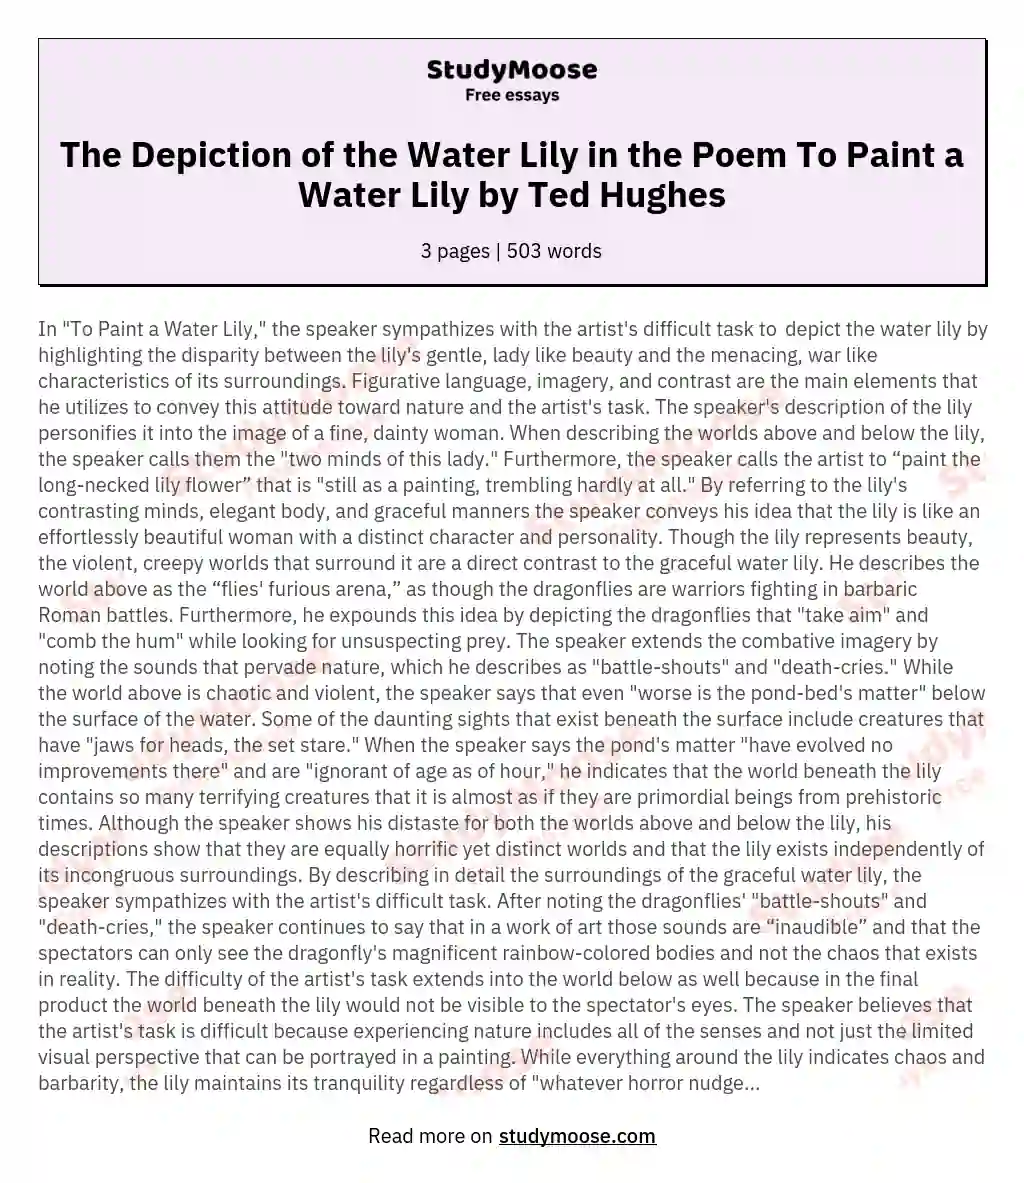 The Depiction of the Water Lily in the Poem To Paint a Water Lily by Ted Hughes essay